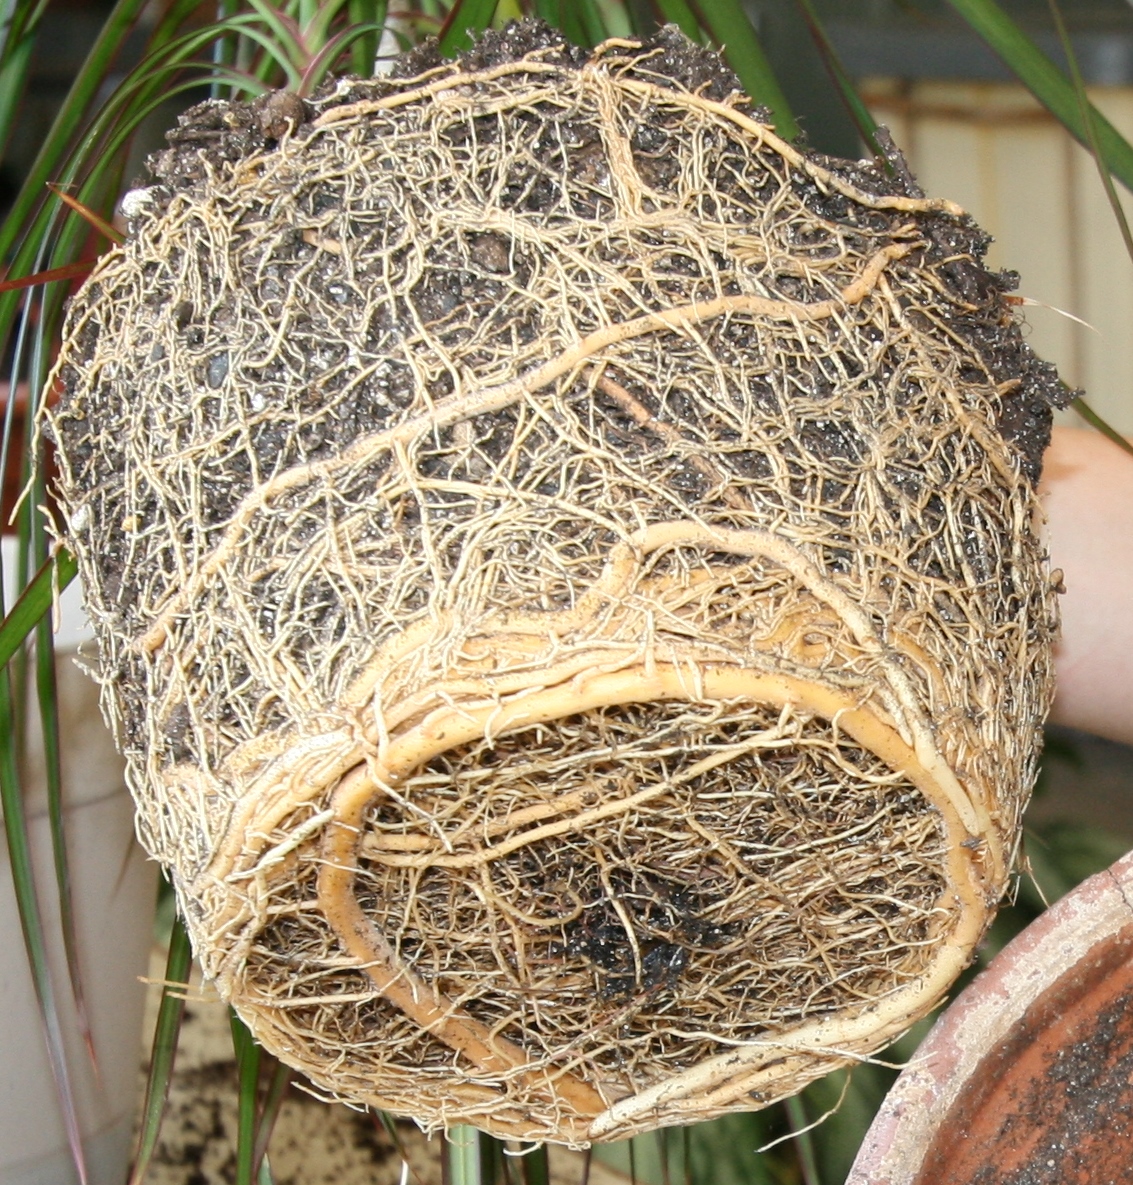 An example of girdling roots on a plant when left to grow in a pot too long.